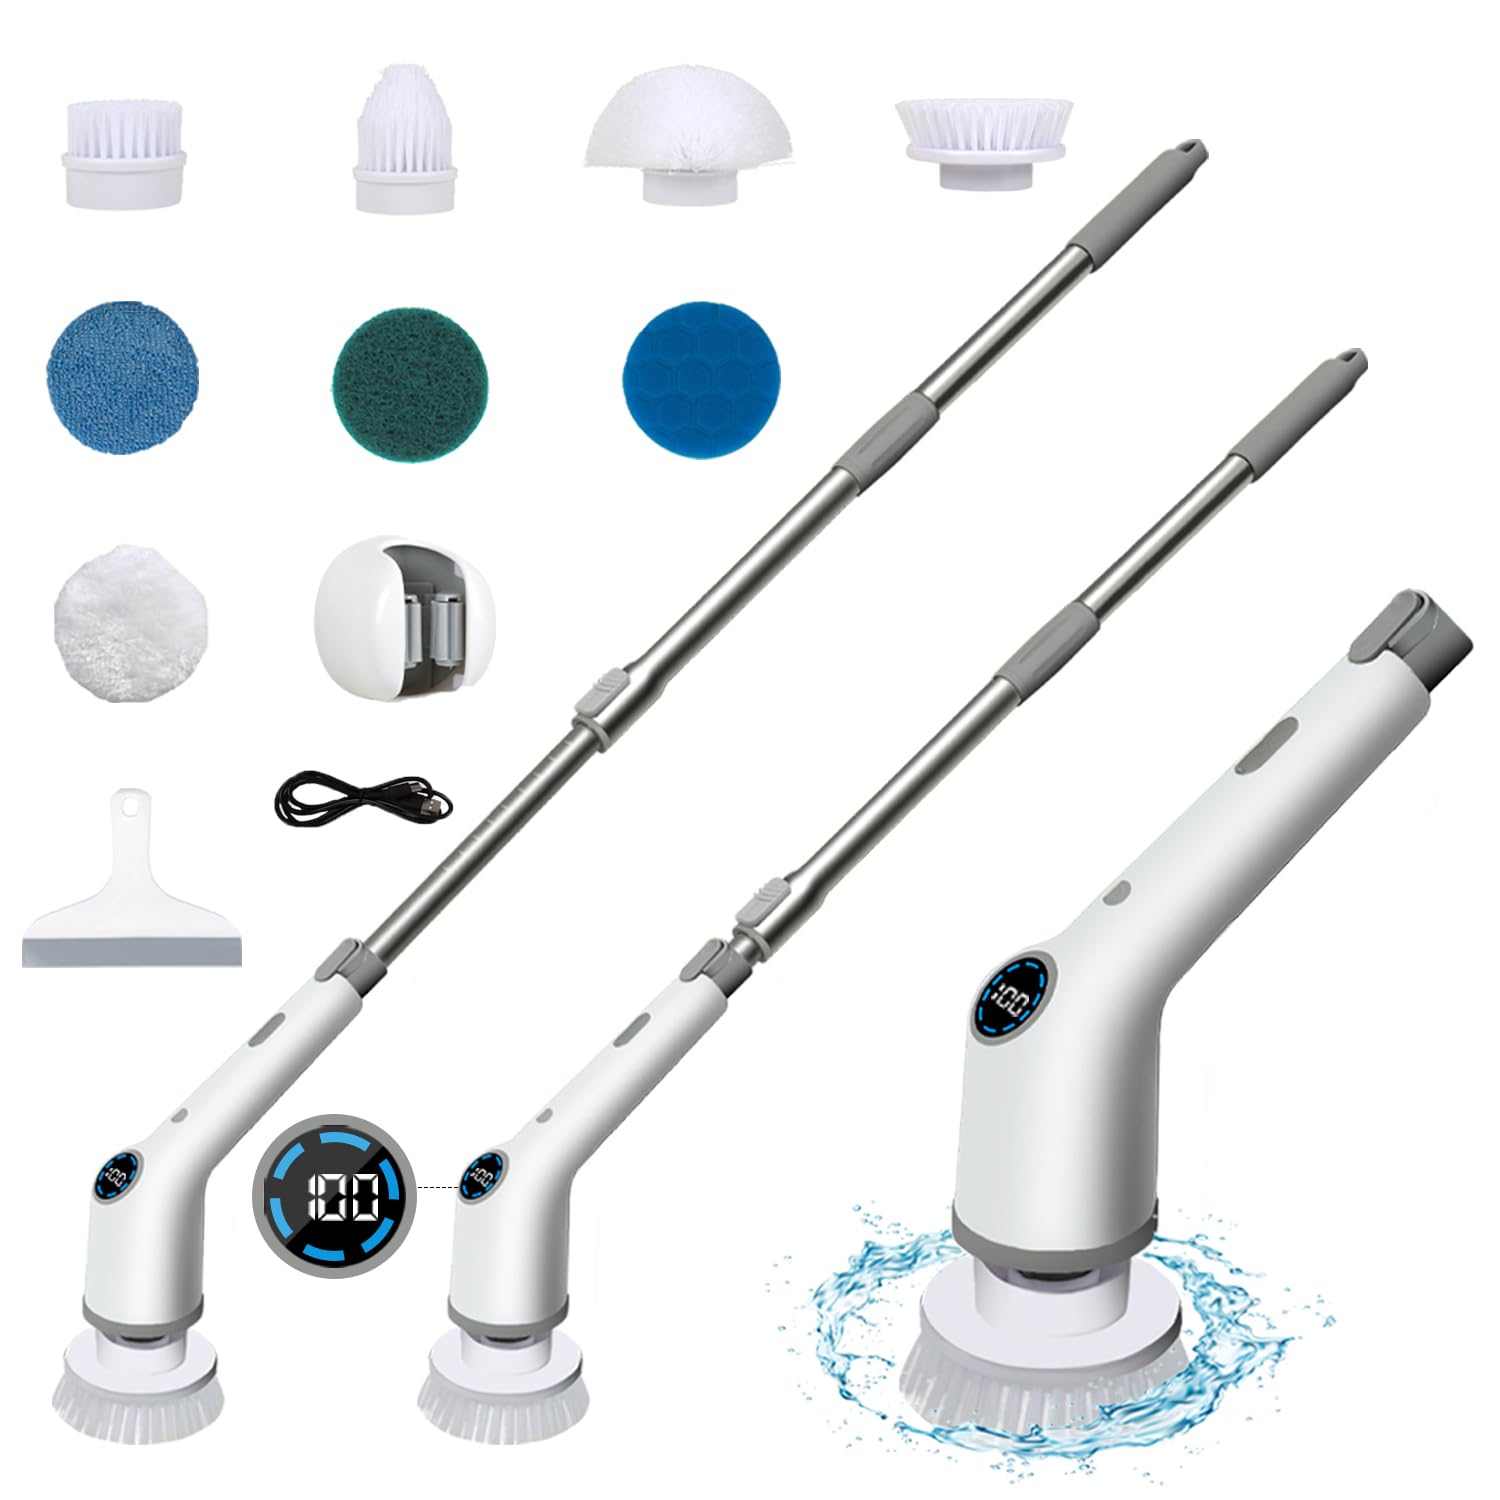 Electric Spin Scrubber, 2023 New Cordless Shower Scrubber with 9 Replacement Head, Plus Water Scraper, Mop Holder, 3 Adjustable Speeds and Adjustable Extension Handle for Bathtub Kitchen Floor